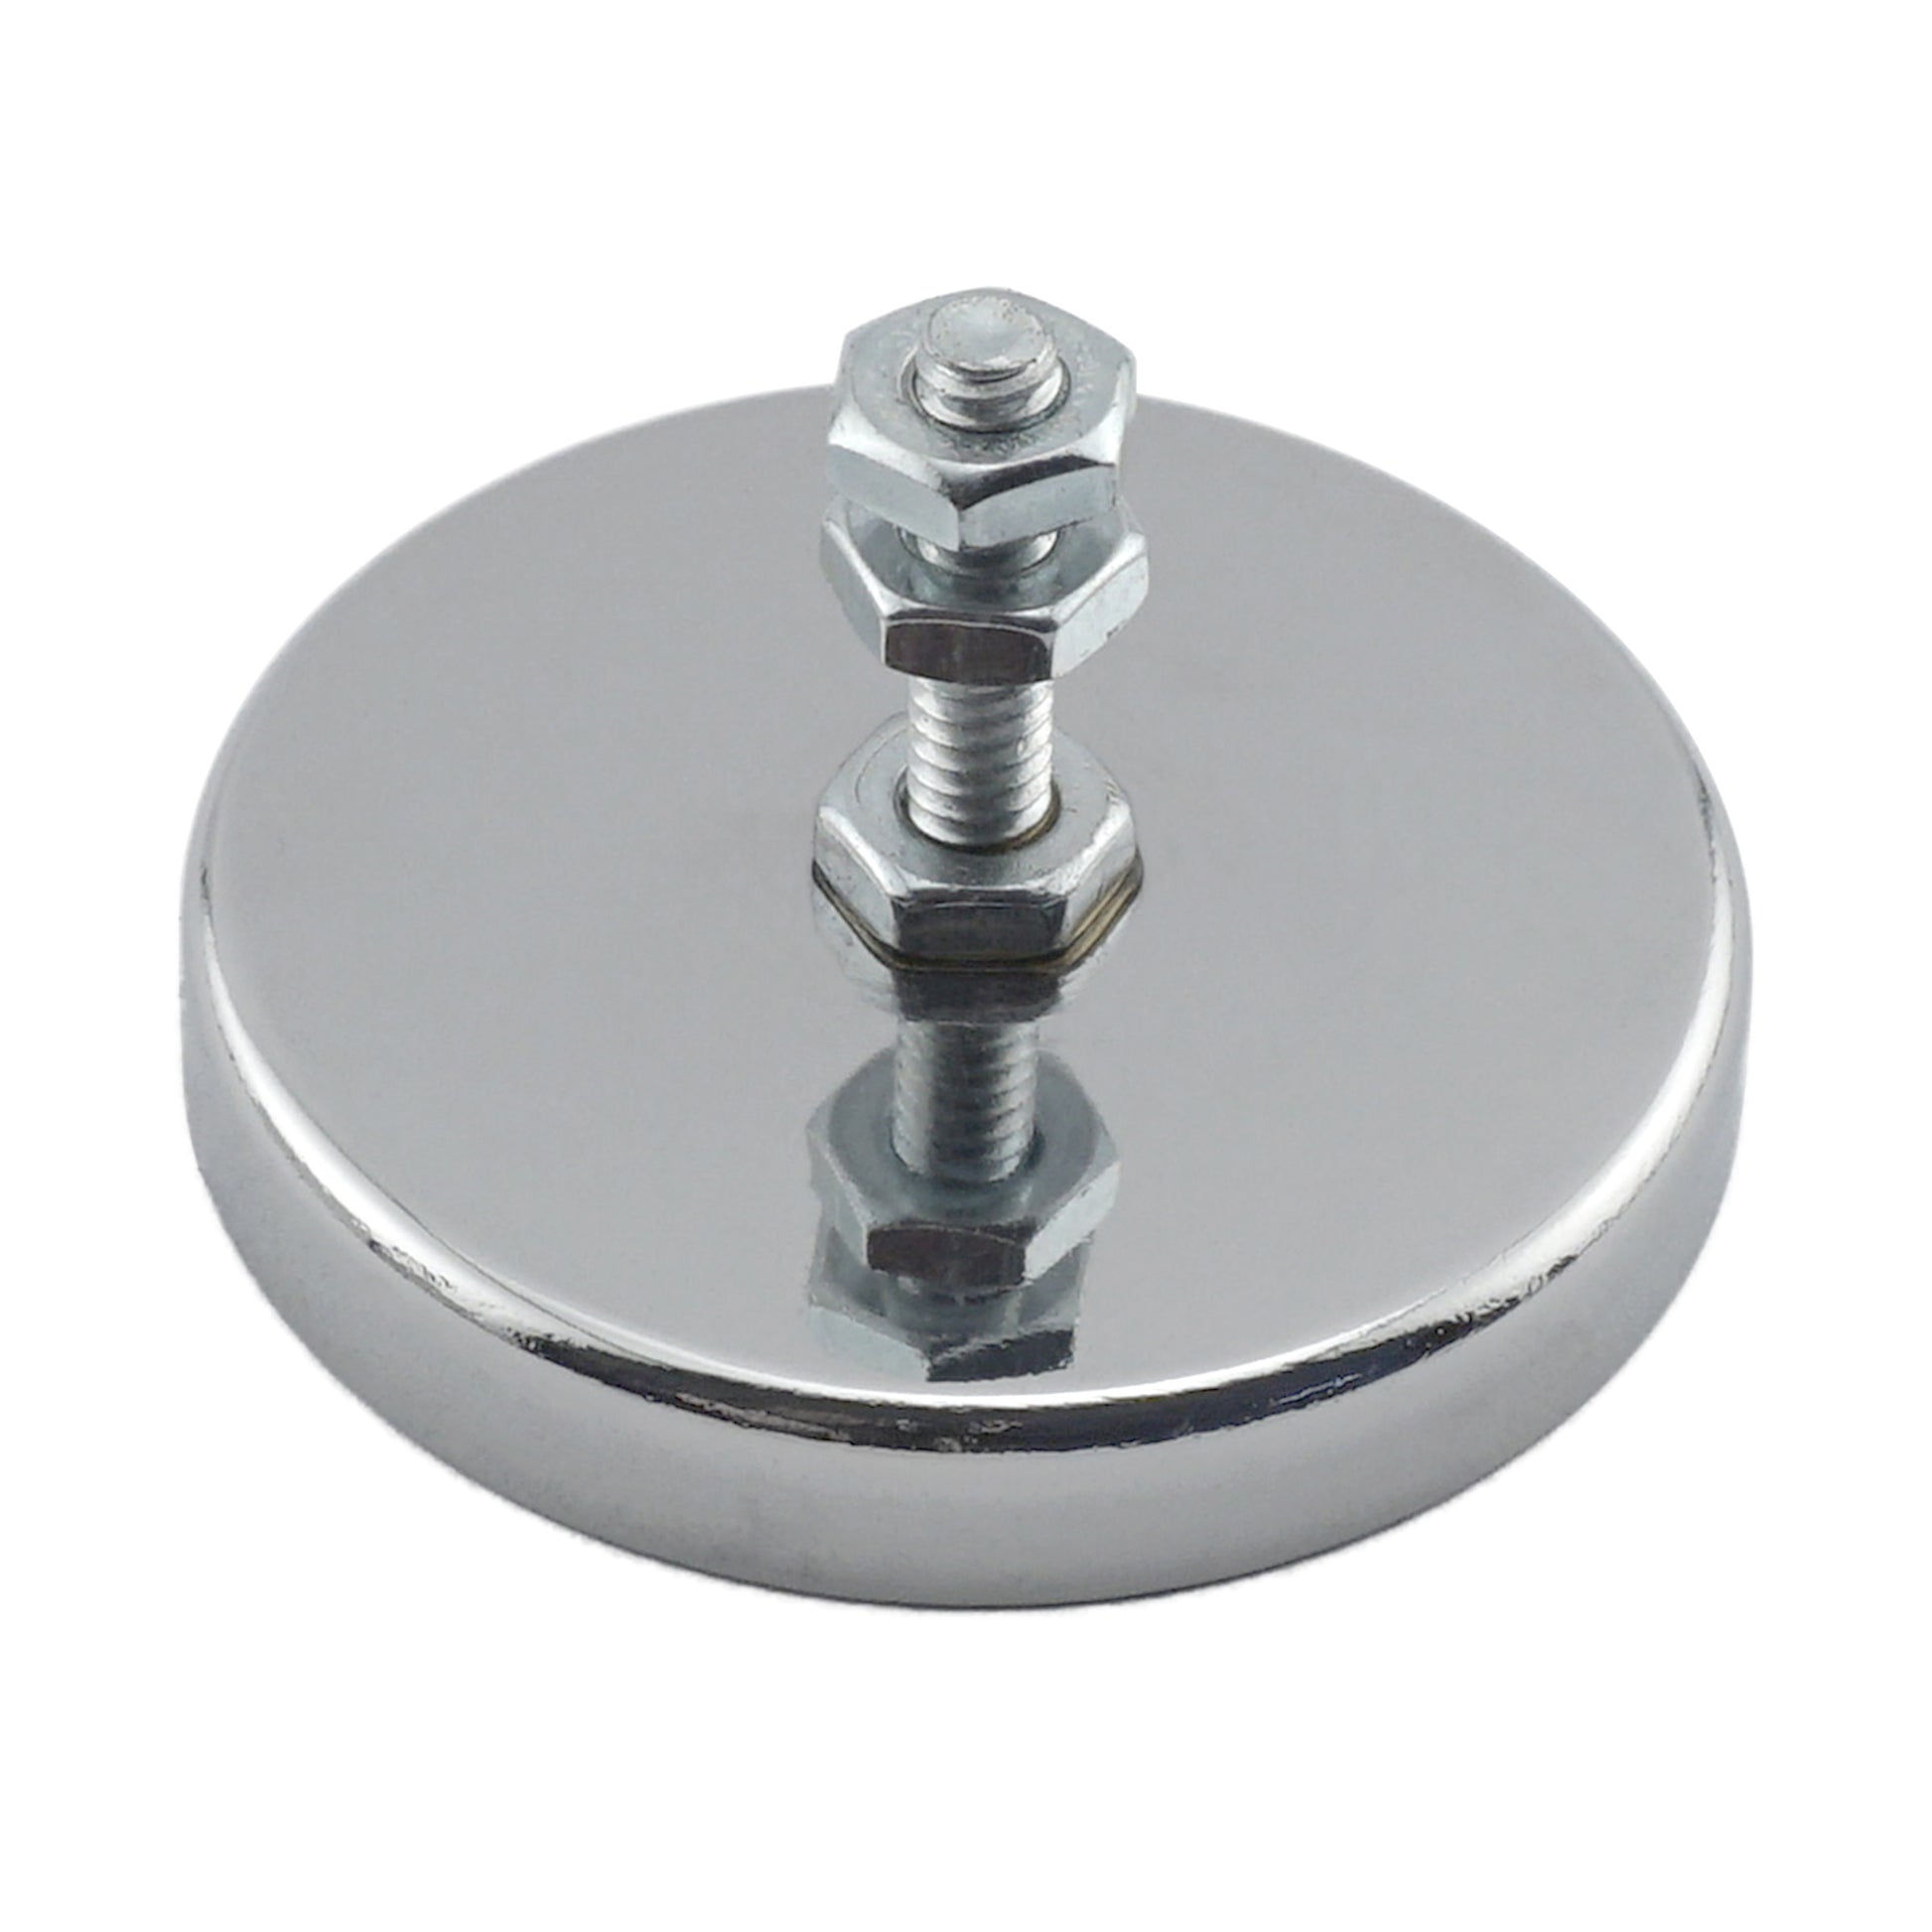 Load image into Gallery viewer, RB50B3N-NEO Neodymium Round Base Magnet with Bolt and Nuts - 45 Degree Angle View